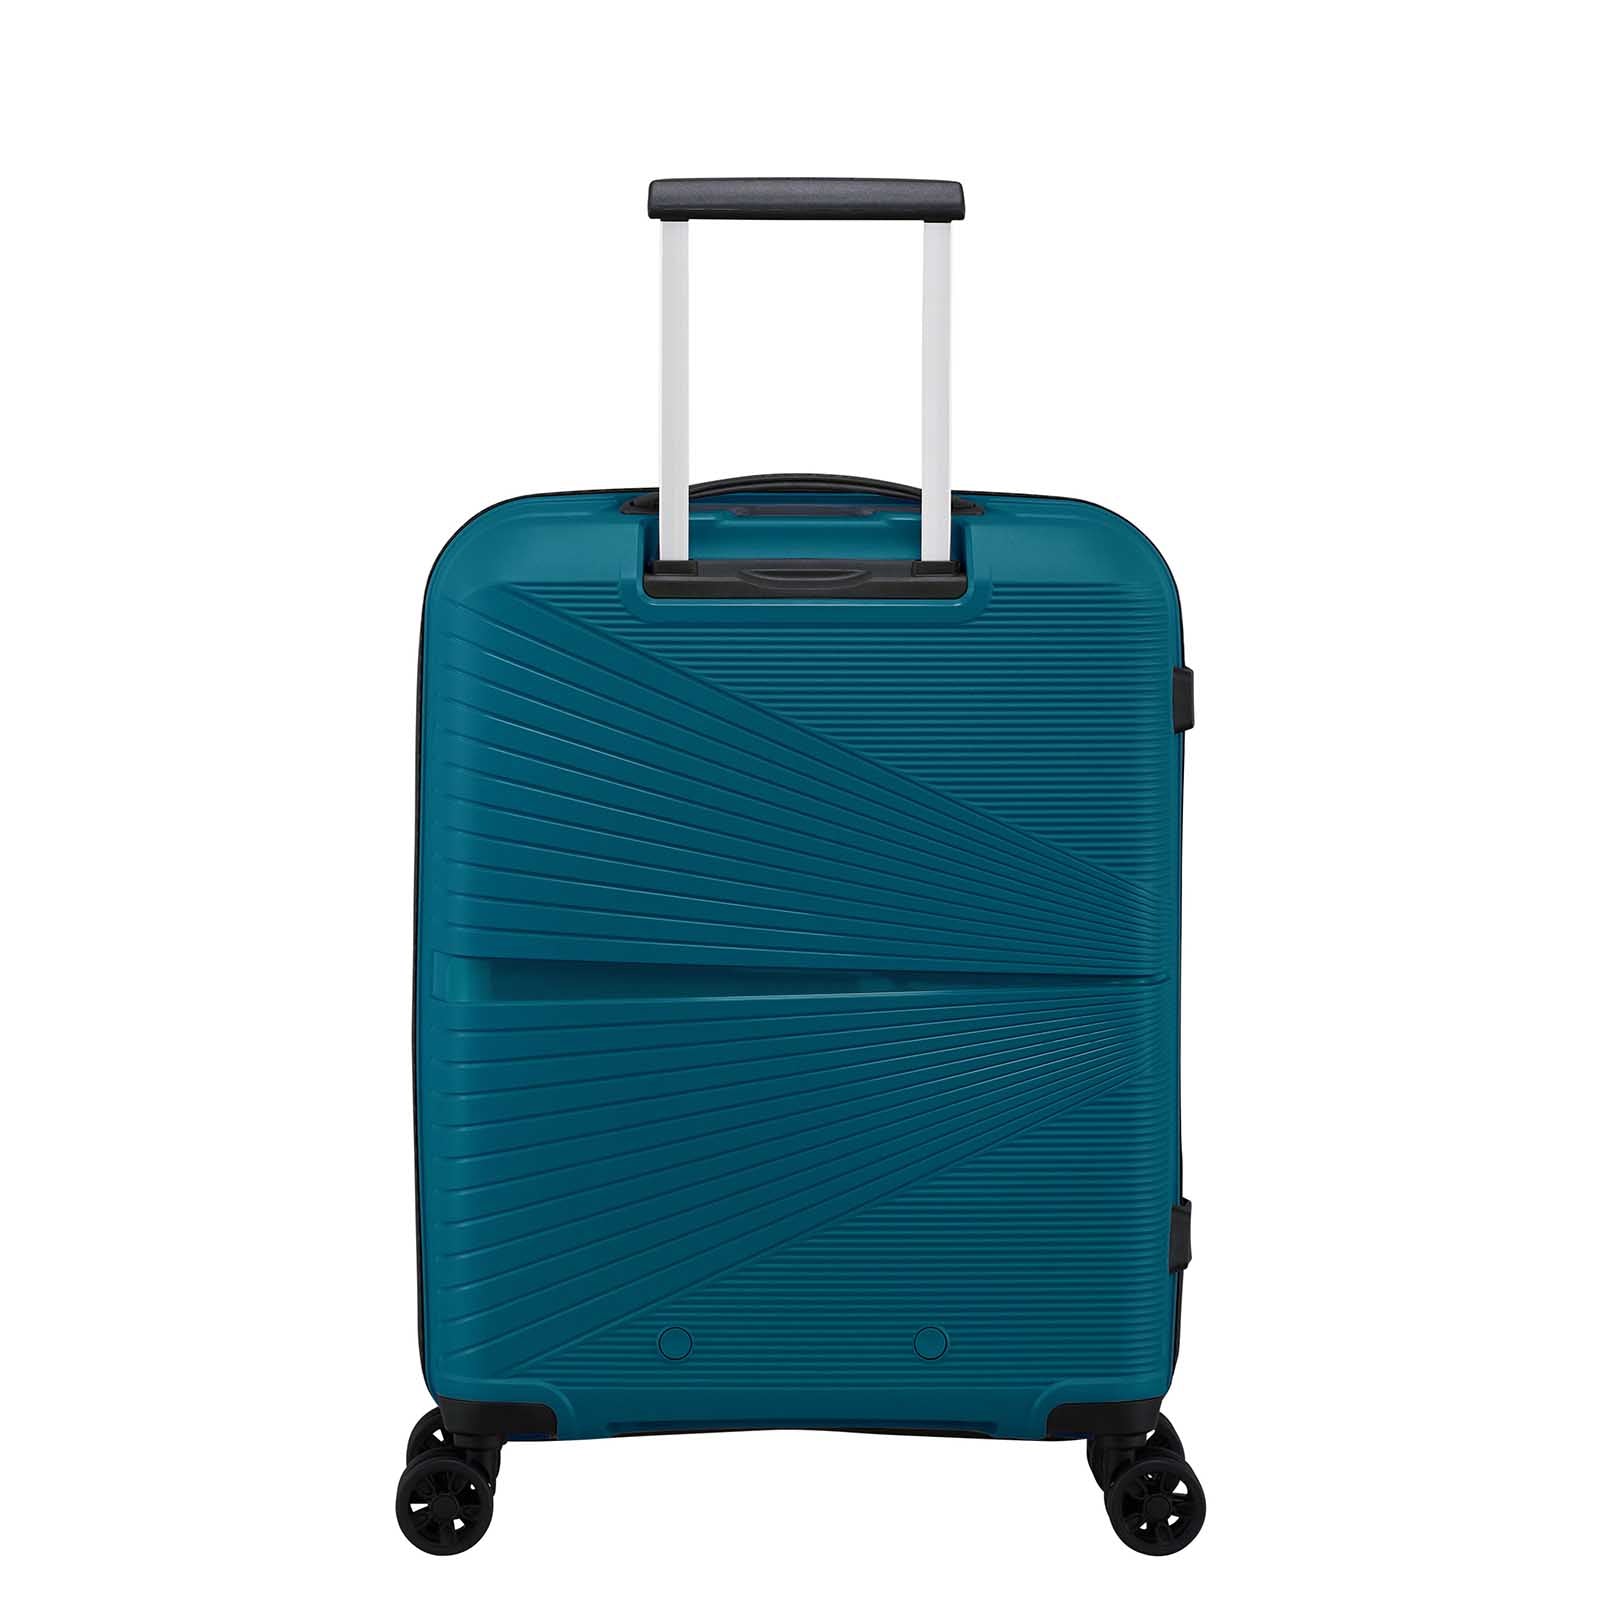 American-Tourister-Airconic-55cm-Carry-On-Suitcase-Deep-Ocean-Back